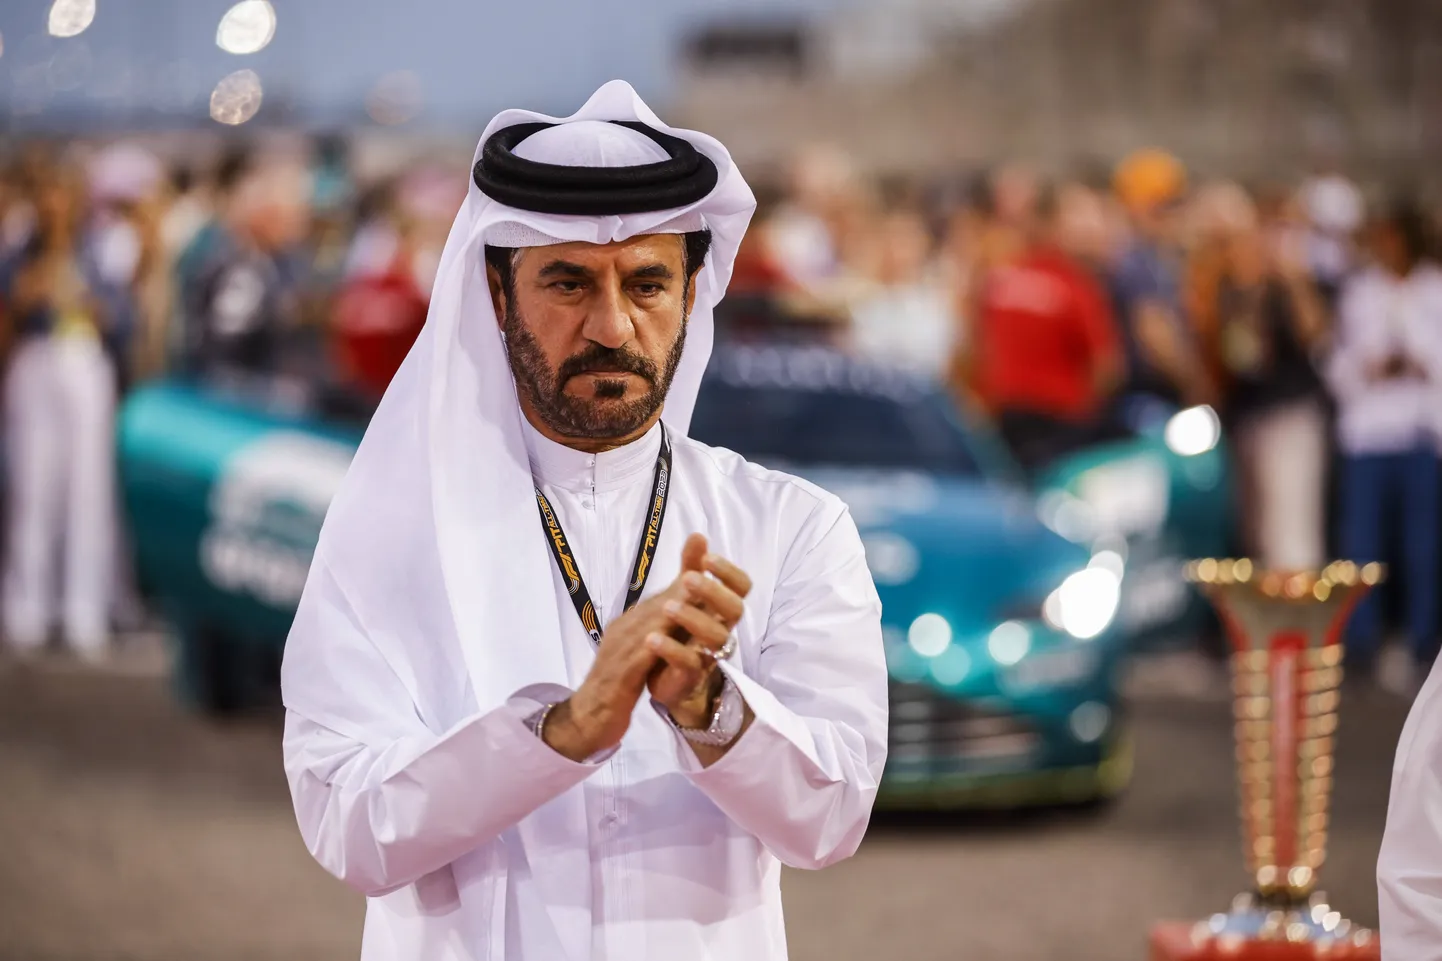 Mohammed Ben Sulayem.